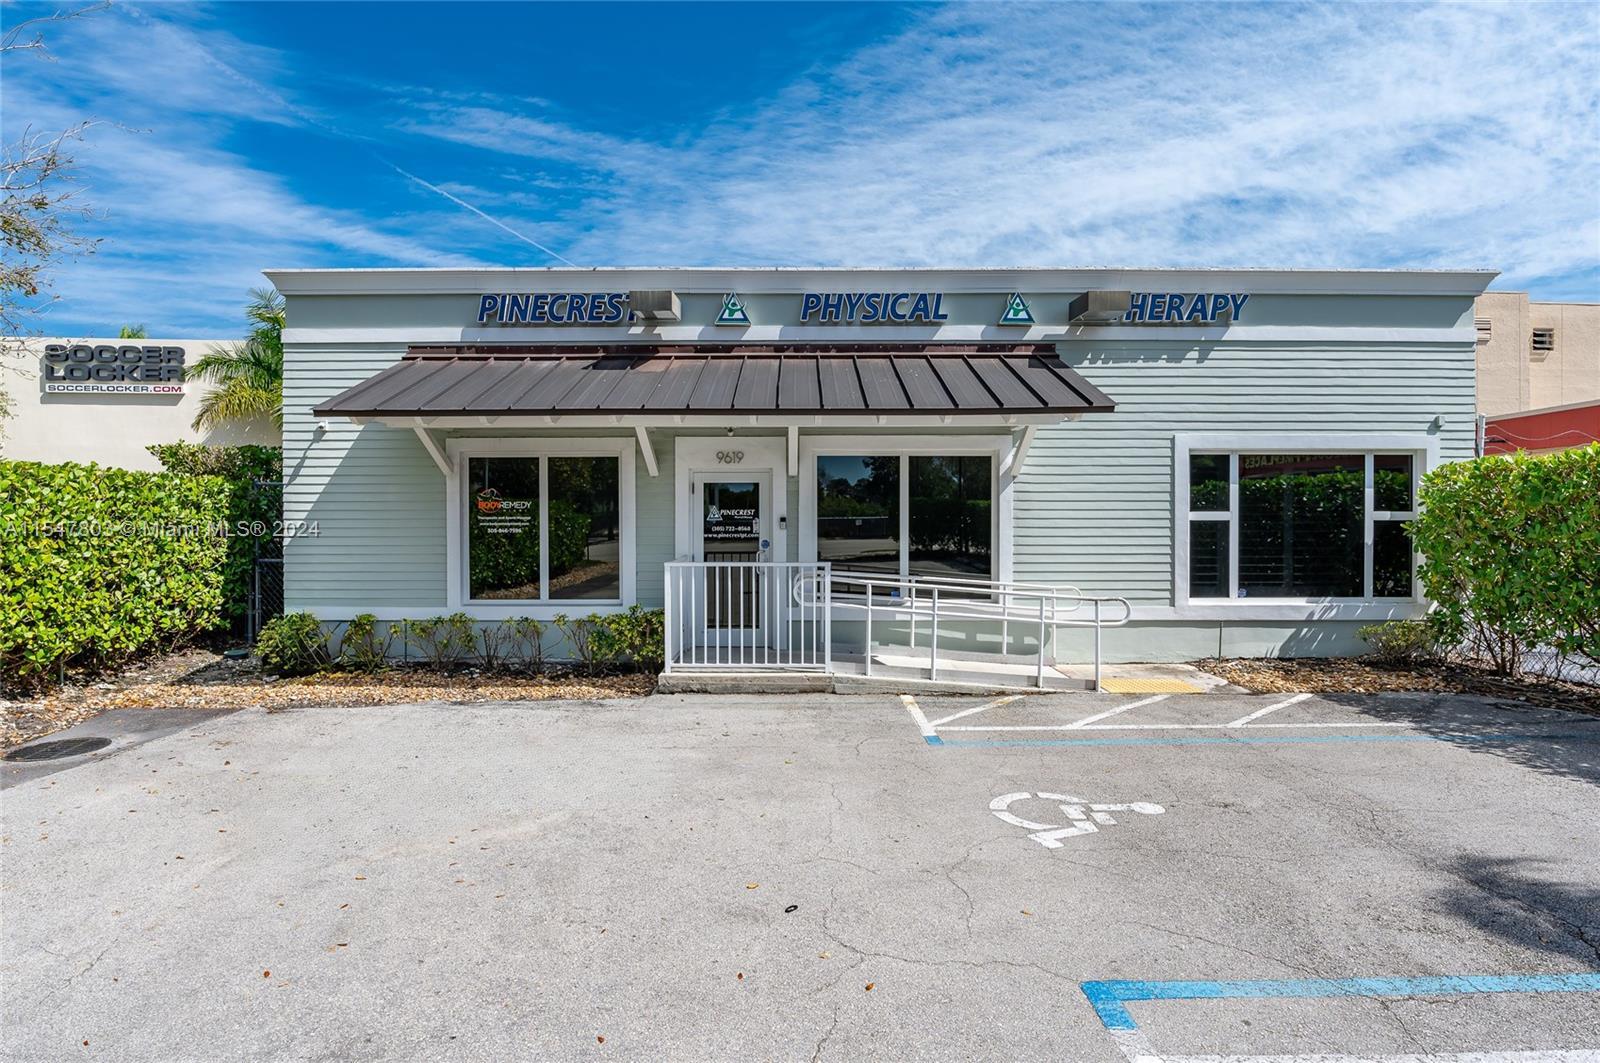 Photo of 9619 S Dixie Hwy in Pinecrest, FL